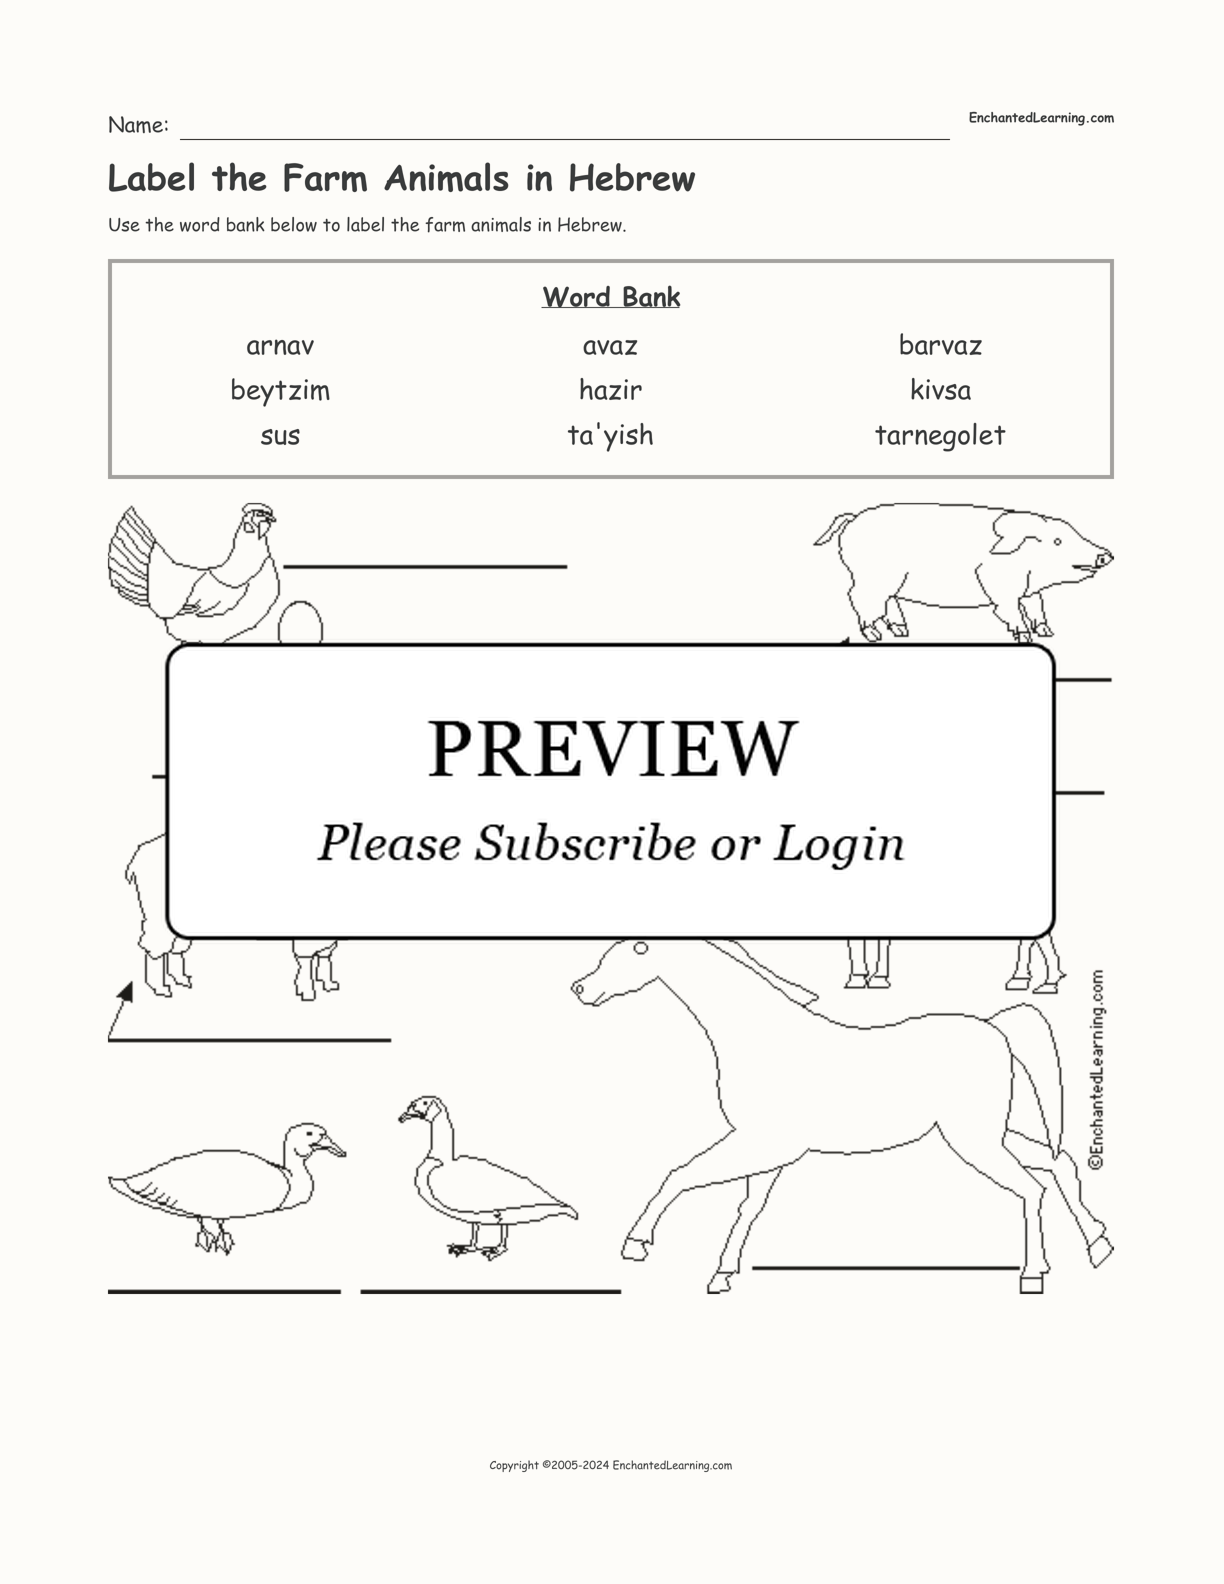 Label the Farm Animals in Hebrew interactive worksheet page 1